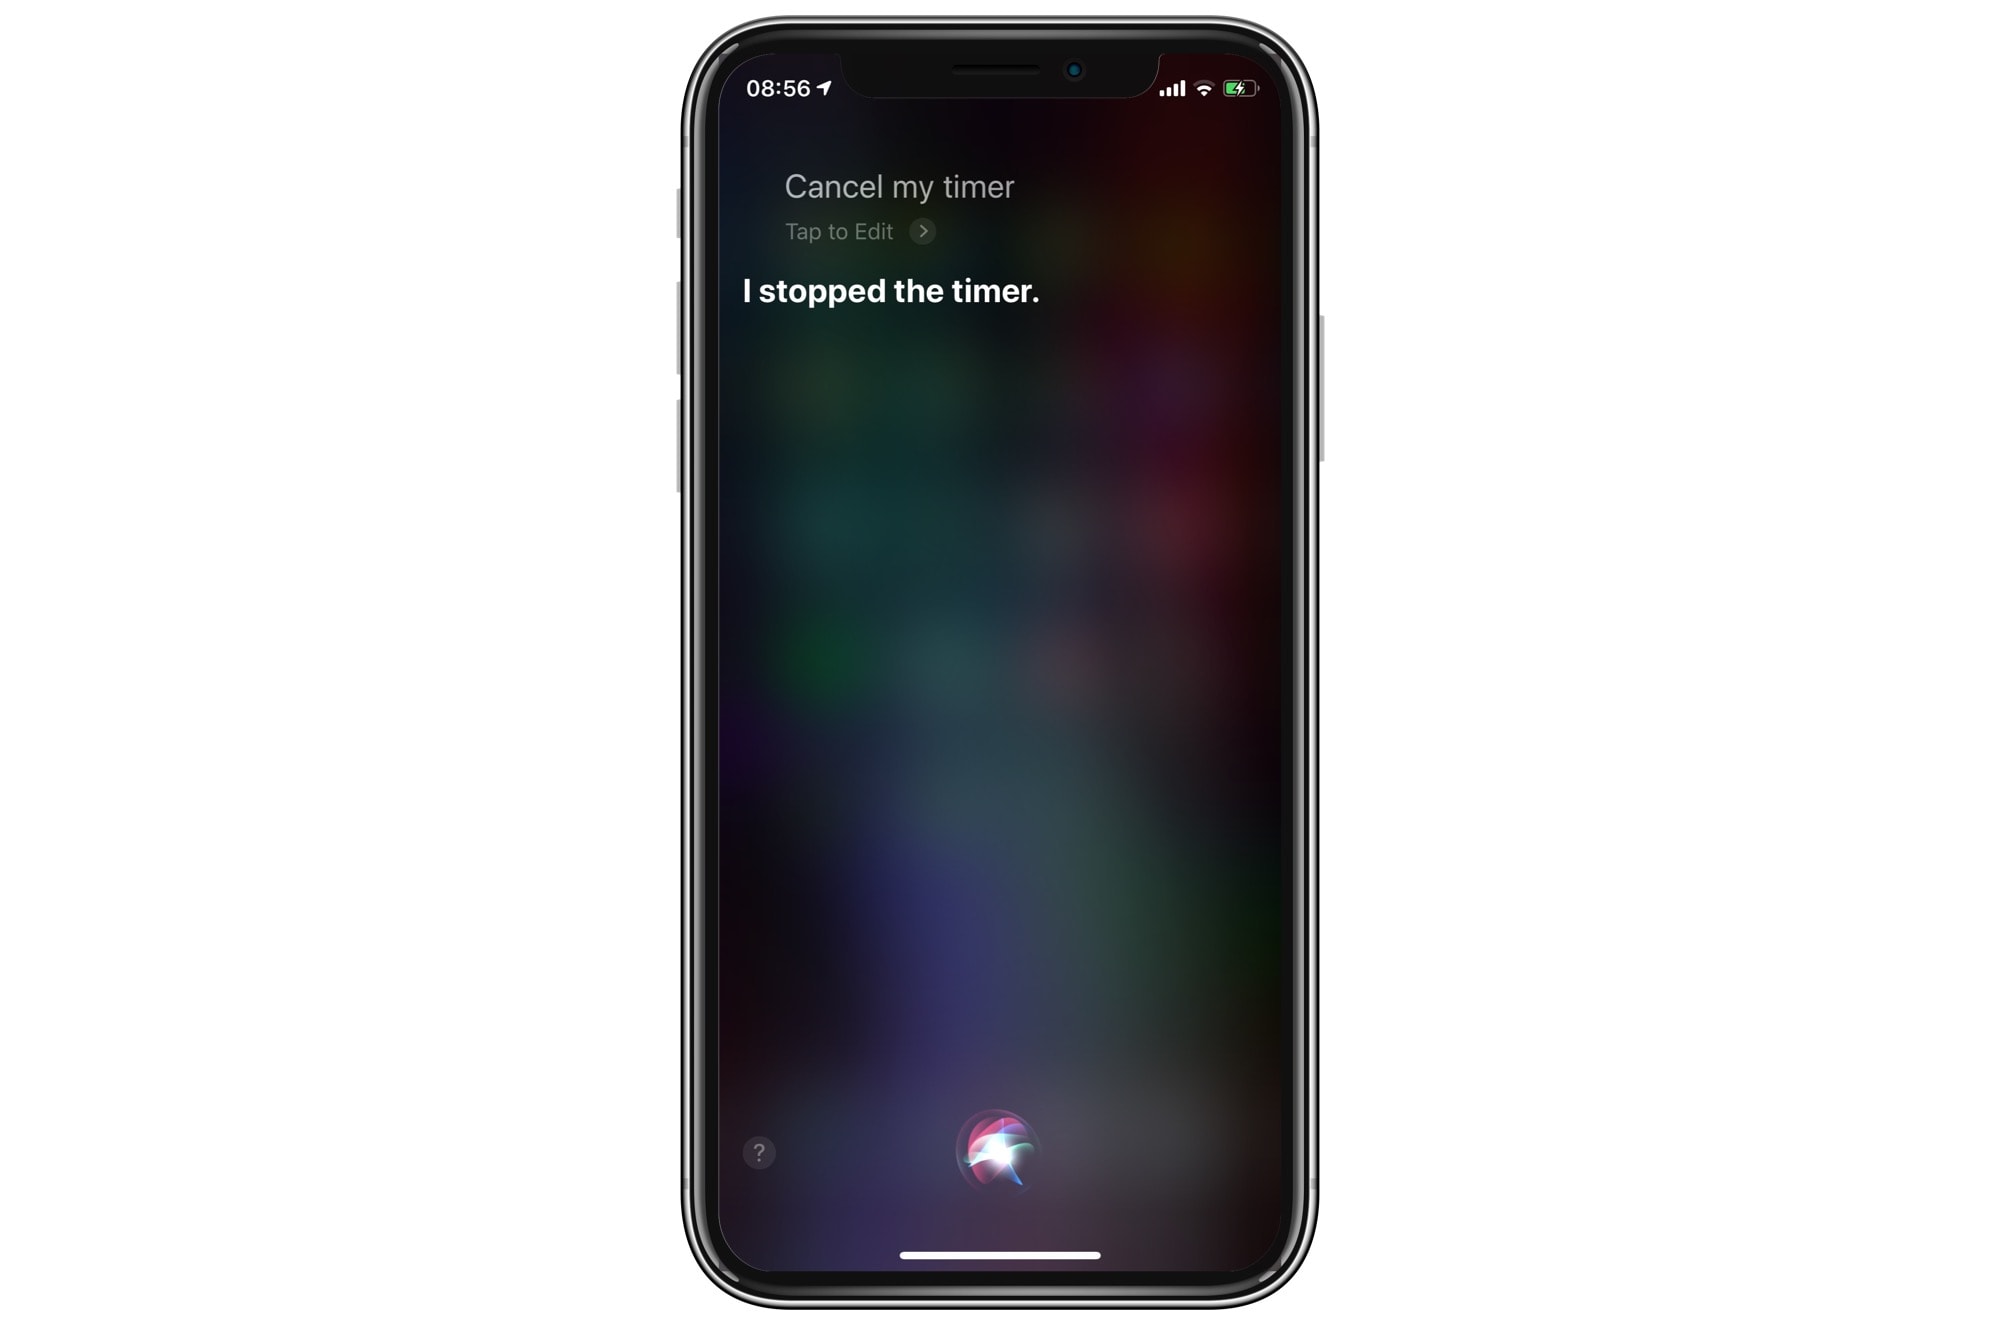 Siri can stop timers as well as starting them.